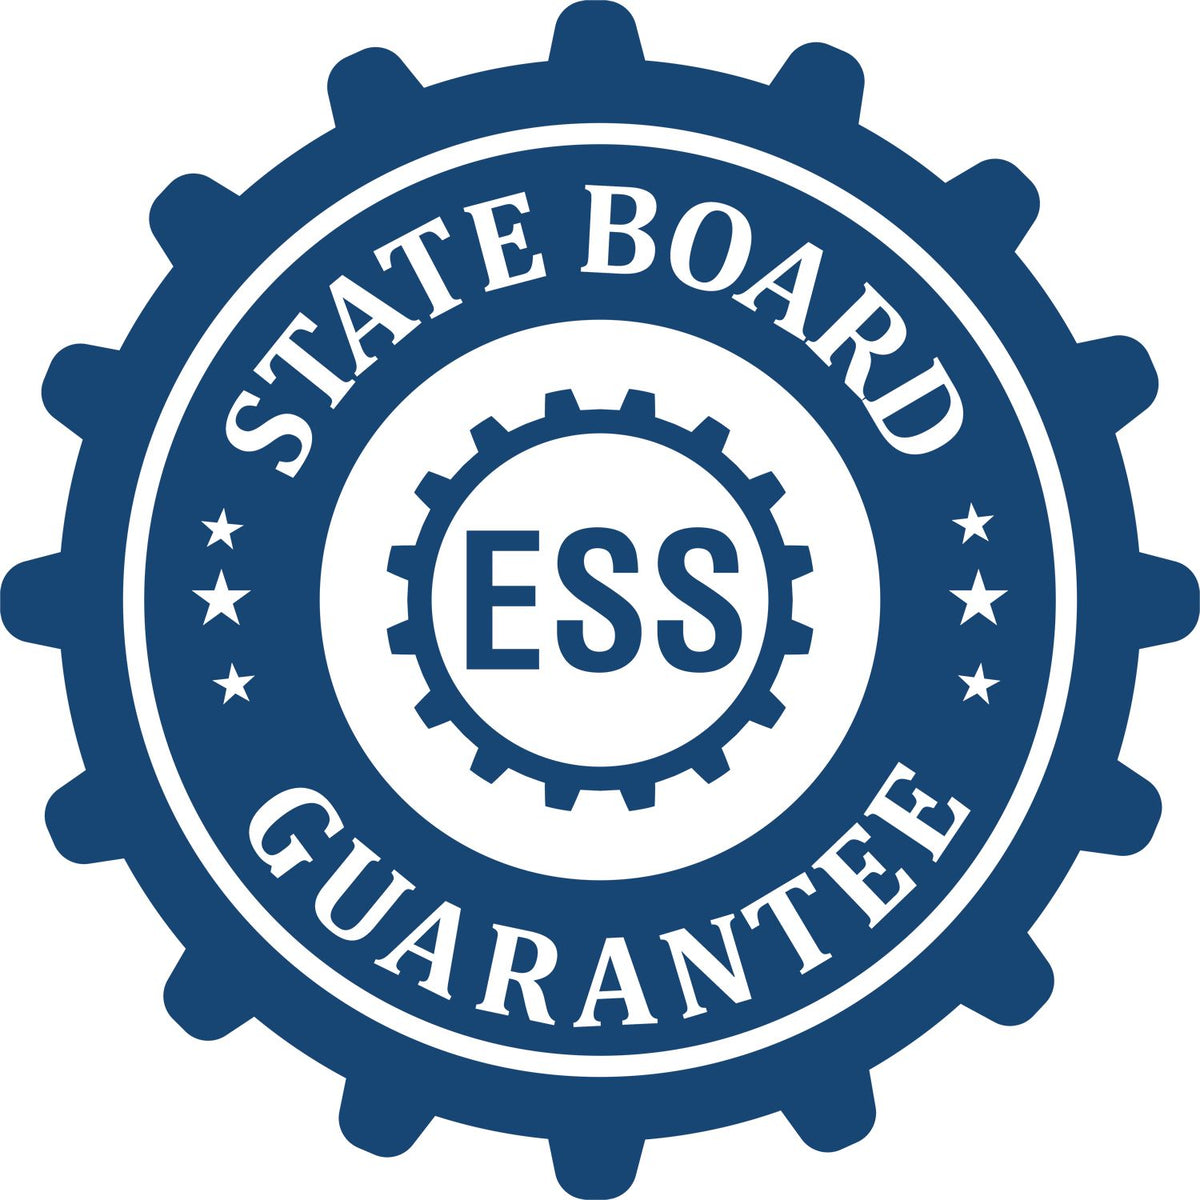 An emblem in a gear shape illustrating a state board guarantee for the Hybrid Louisiana Engineer Seal